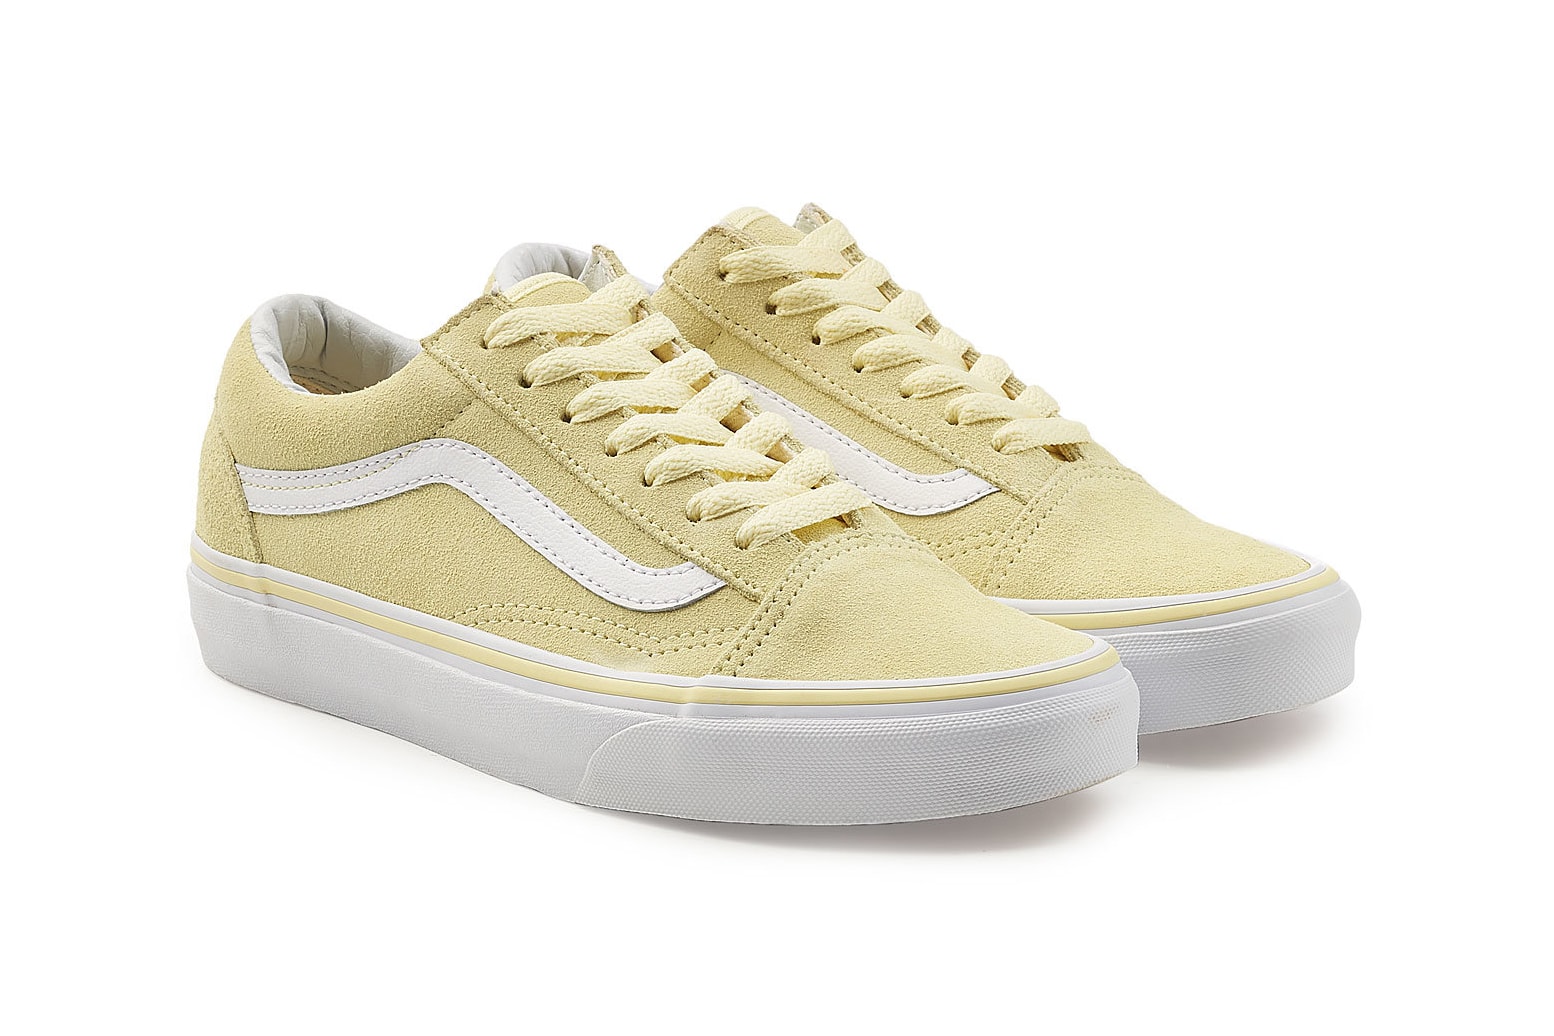 Vans Old Skool Sneaker Pastel Yellow off the wall unisex mens womens suede pale light spring summer where to buy stylebop